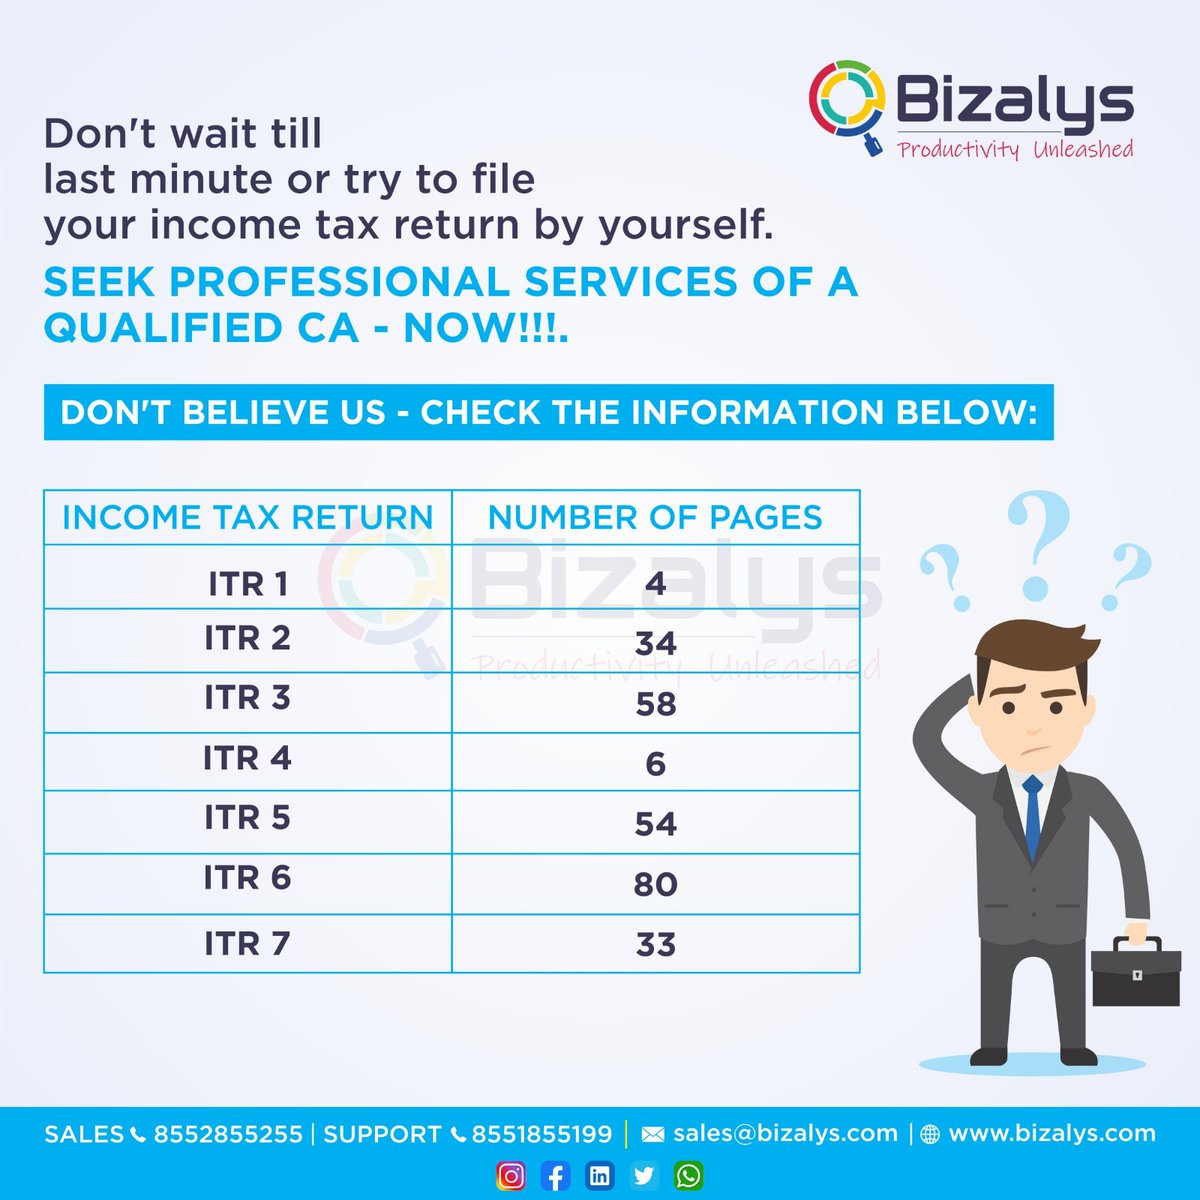 Ready to tackle your income tax return? Don't risk errors or missed deductions! 😐
Don't delay, get started now! 📈
#TaxFilingMadeEasy #CAProblems #TaskOverload #ConquerTheNumbers #TimeSavingSolutions #BusinessGrowth #OptimizeOperations #MaximizeProfitability #ClientSuccess